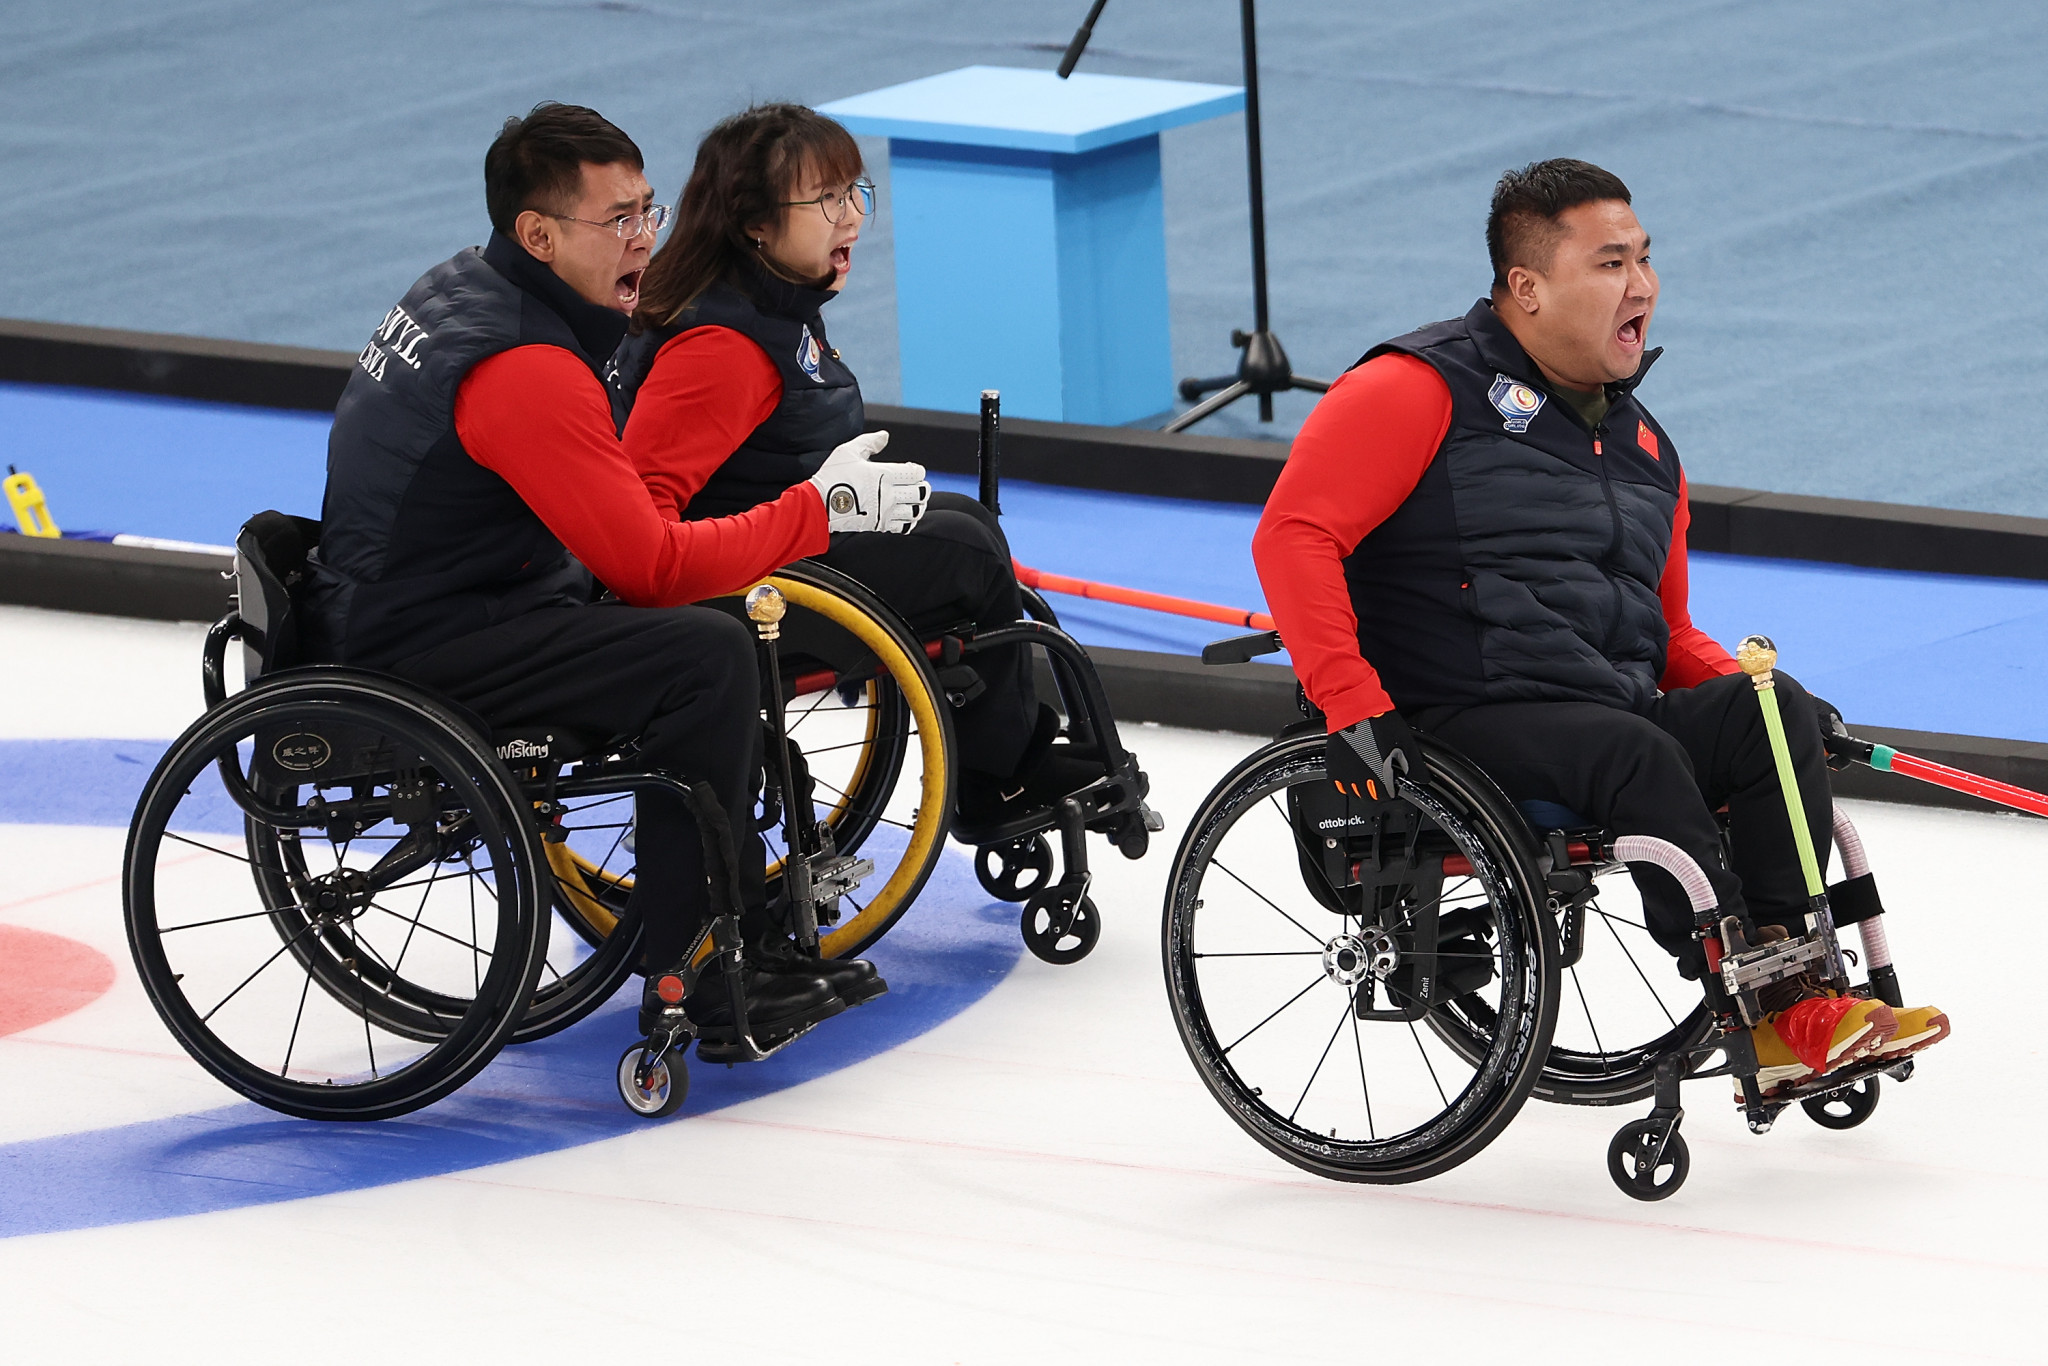 China won their first match of the Beijing 2022 Paralympics in wheelchair curling ©Getty Images